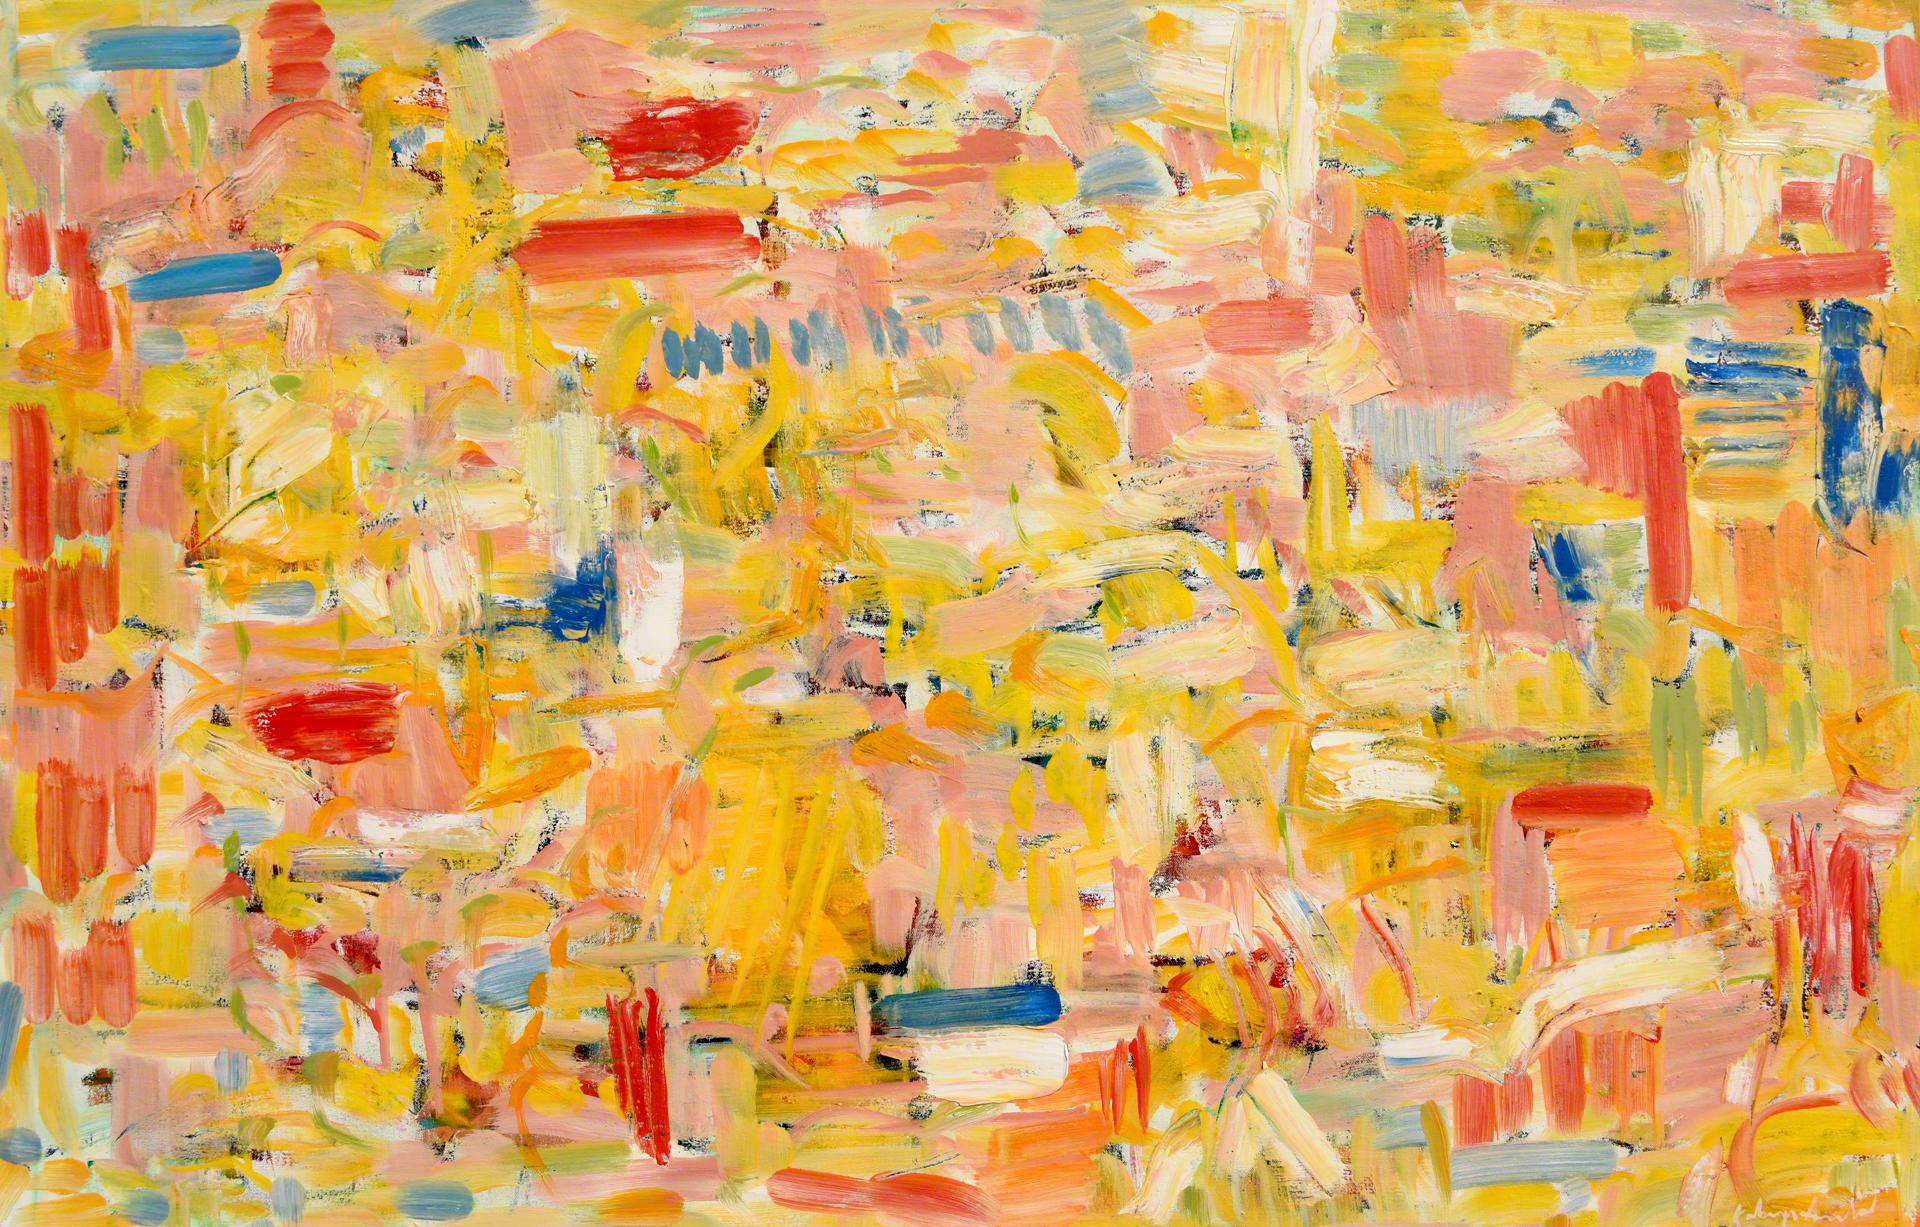 "After Urbana #3", brightly colored abstract oil painting on canvas - Painting by Kathryn Arnold